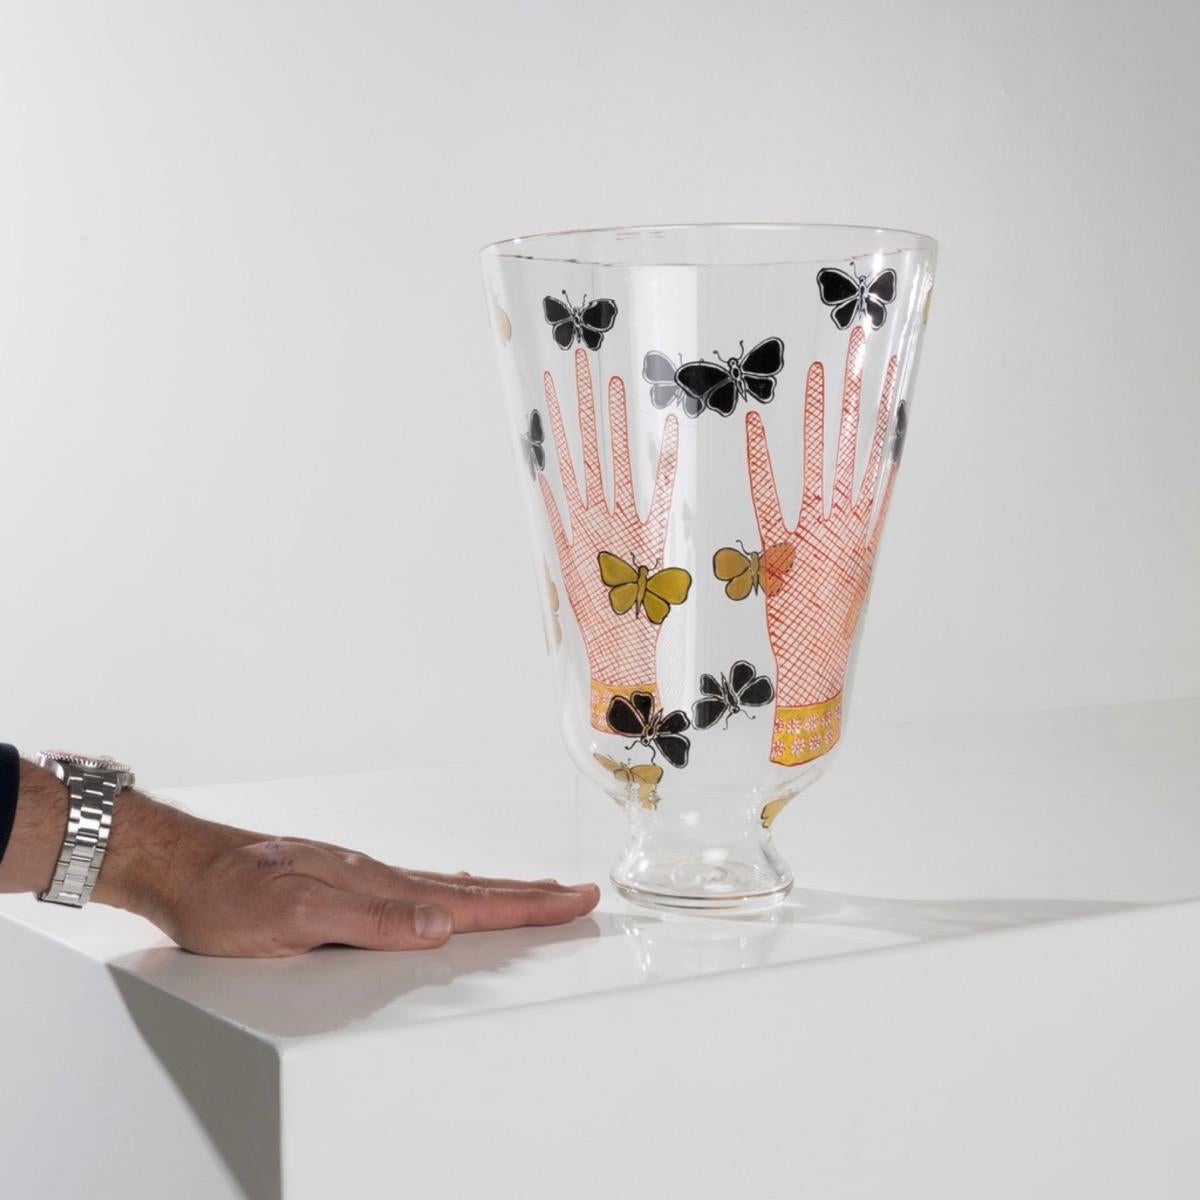 Vase with Hands and Butterflies by Piero Fornasetti, S.A.L.I.R 1